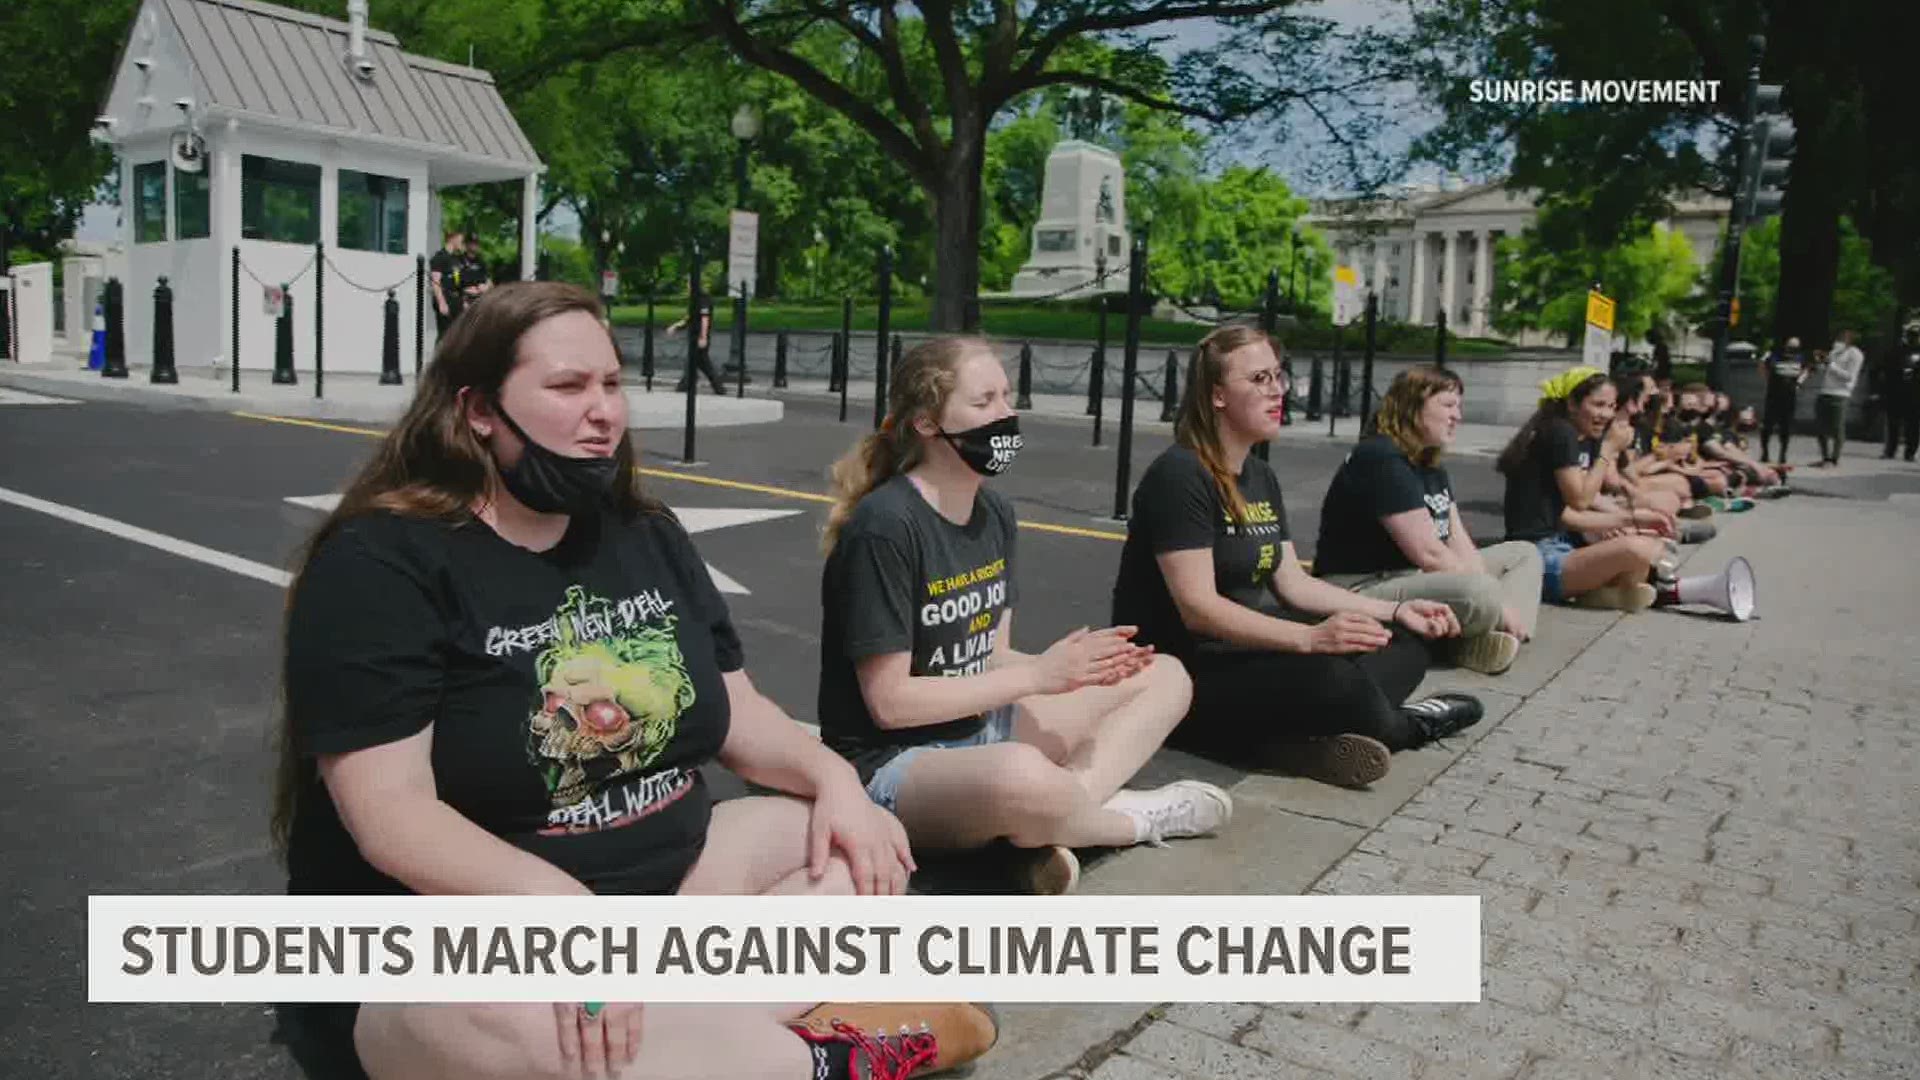 The group, part of Sunrise Movement, is urging President Biden to pass the American Jobs Plan, which includes funding of the Civilian Climate Corps.